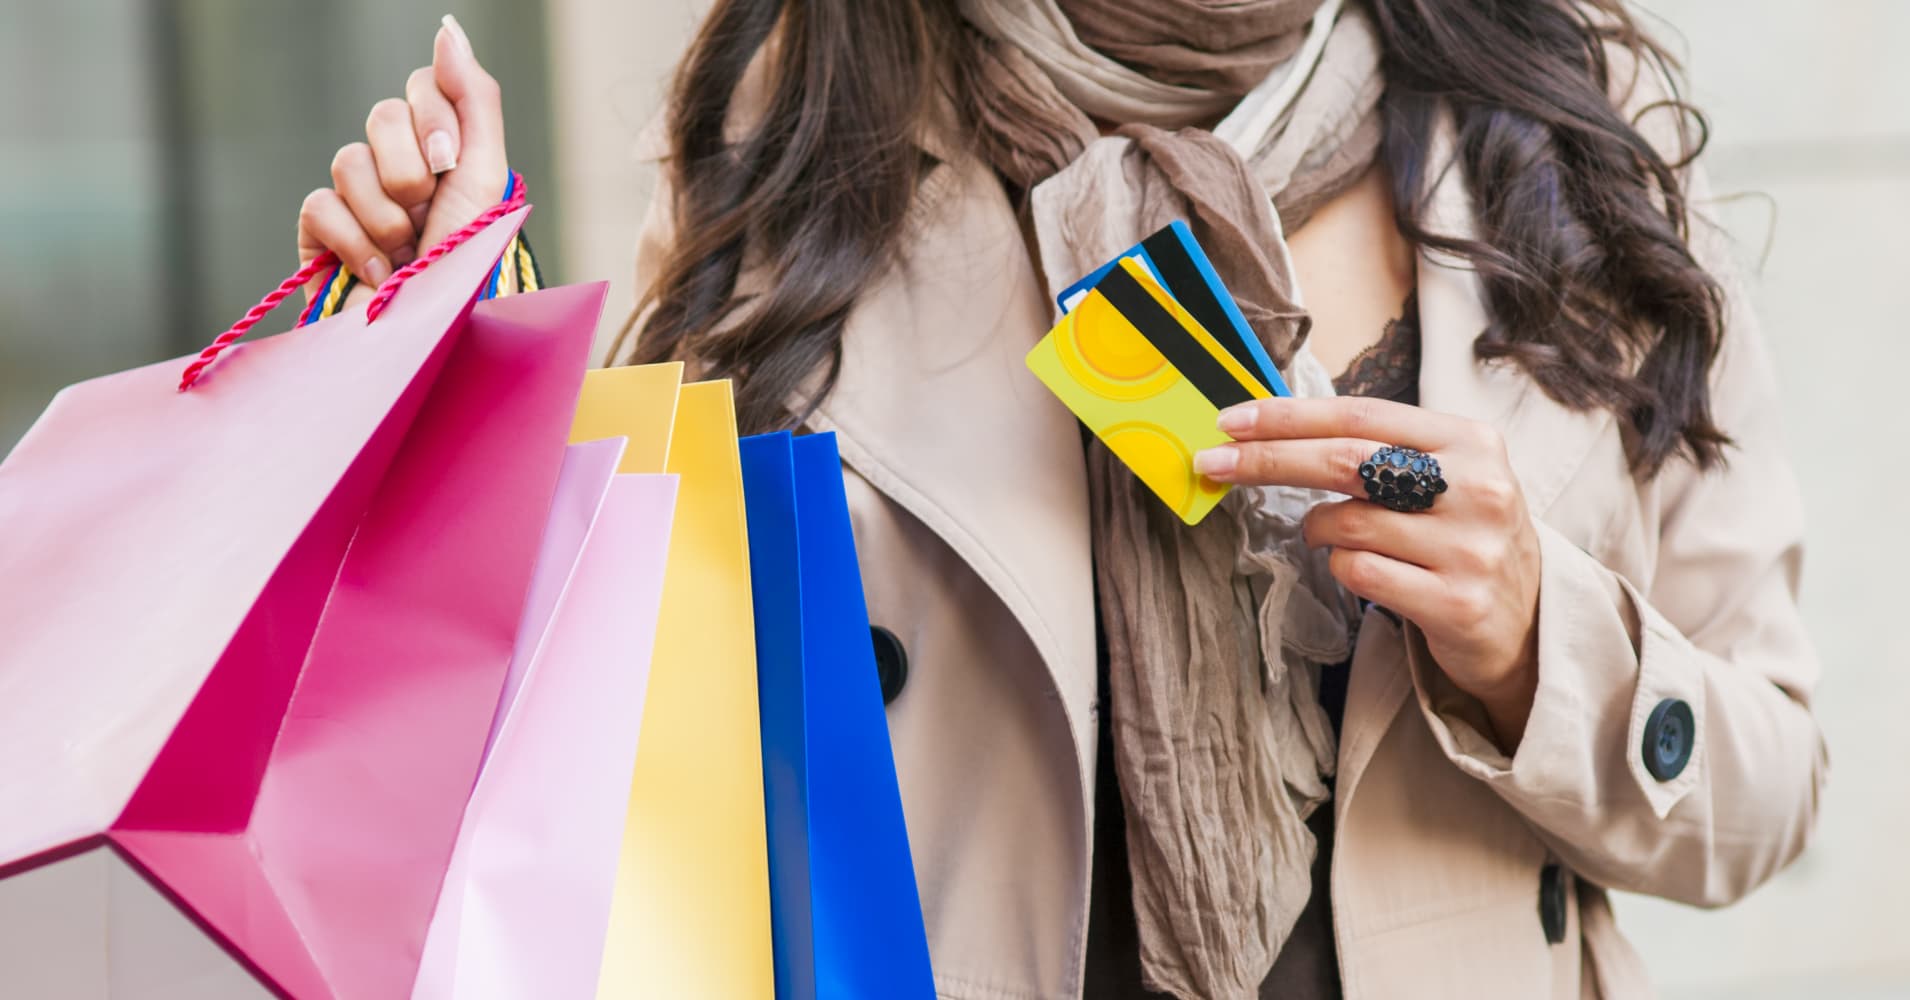 Debt addiction Red is NOT the new black for shopaholics